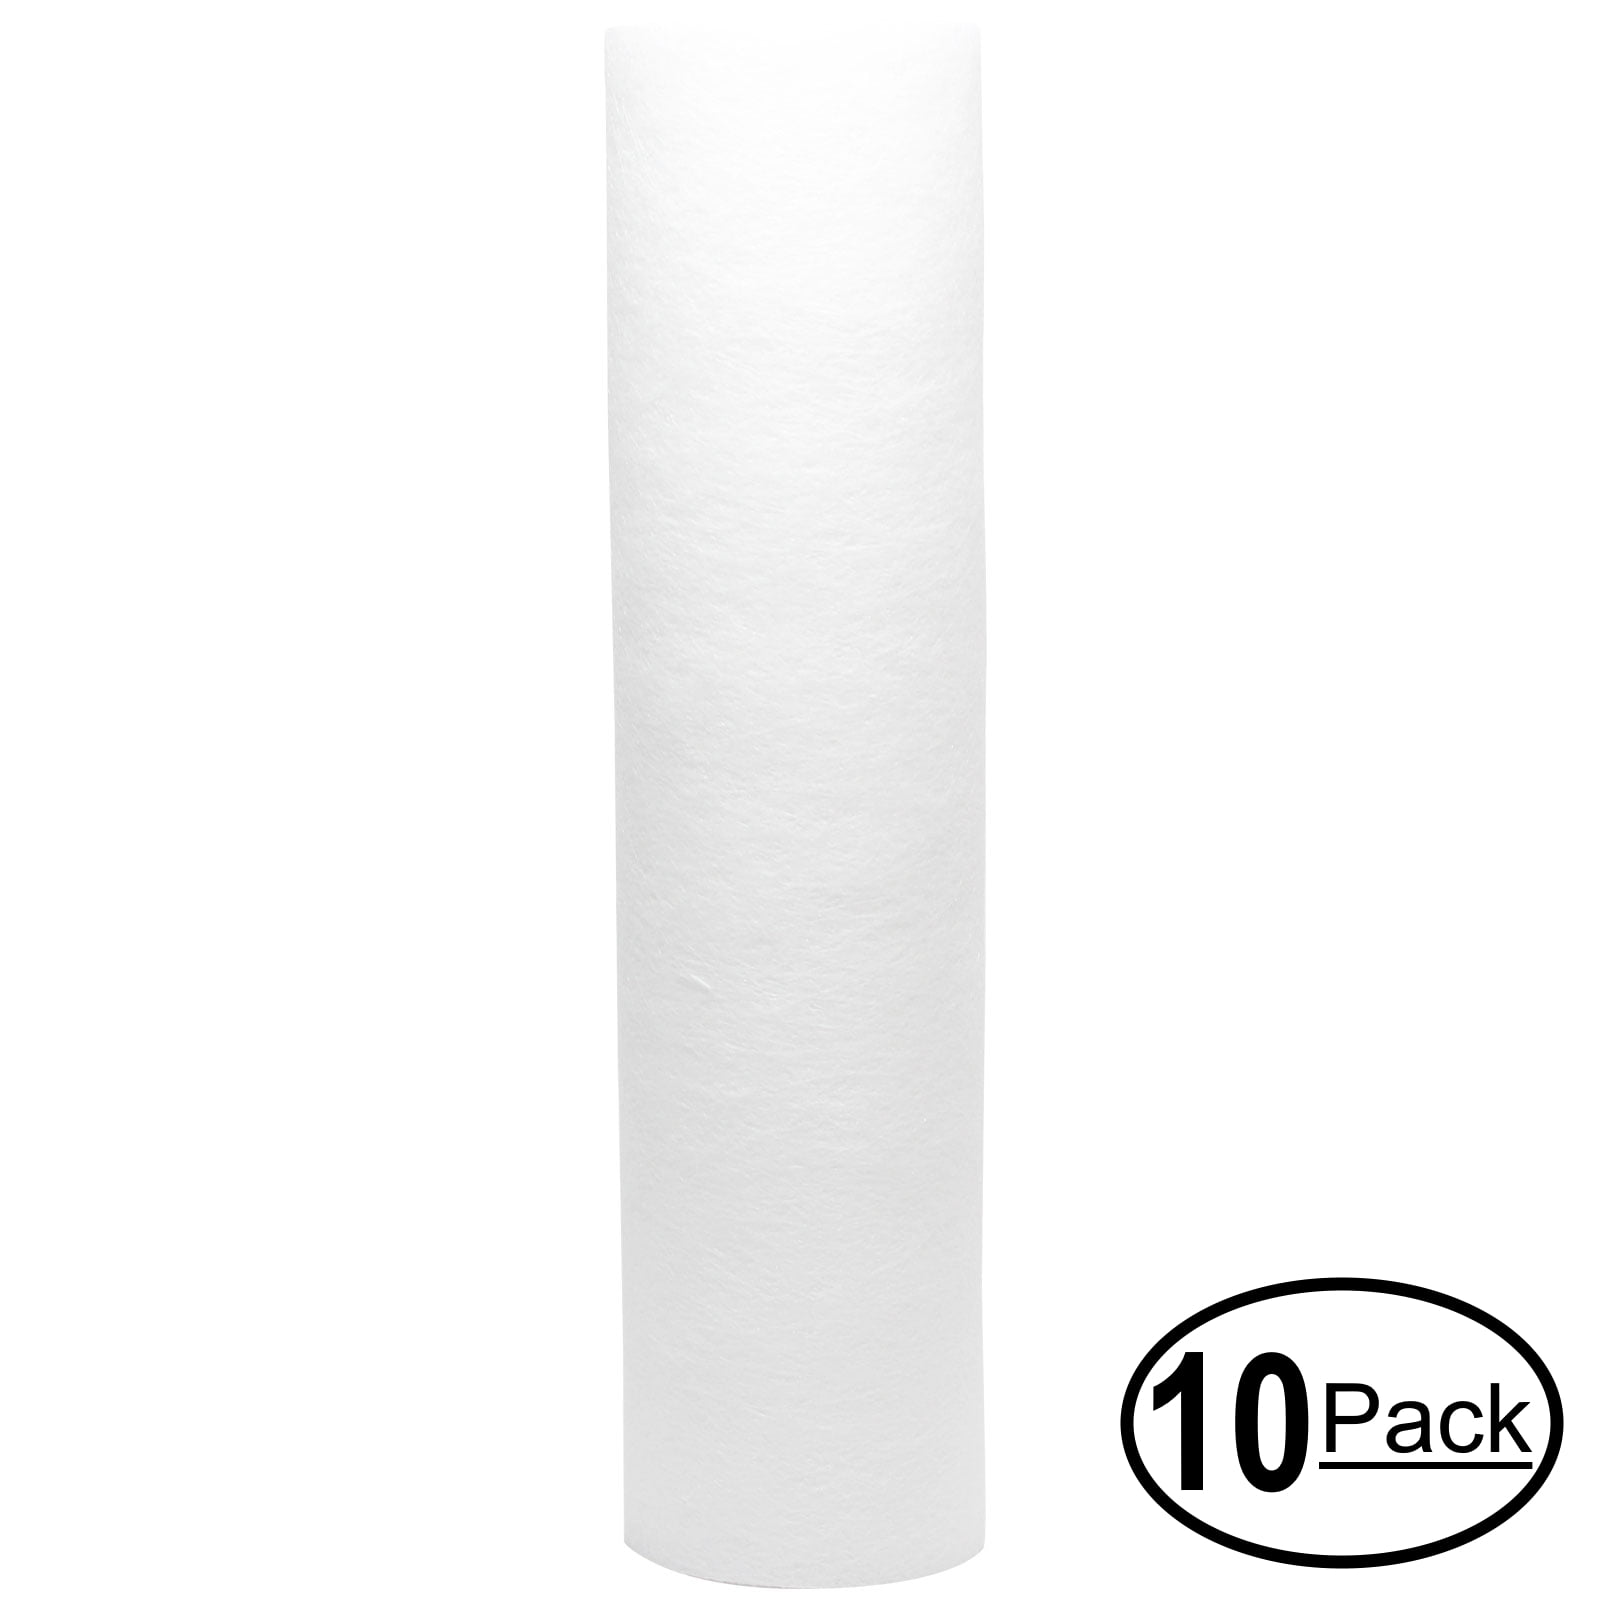 5-Pack Replacement for Quantrol GFHD1175ND430 Polypropylene Sediment Filter Denali Pure Brand Universal 10-inch 5-Micron Cartridge Compatible with Quantrol Single Cartridge Filter Housing